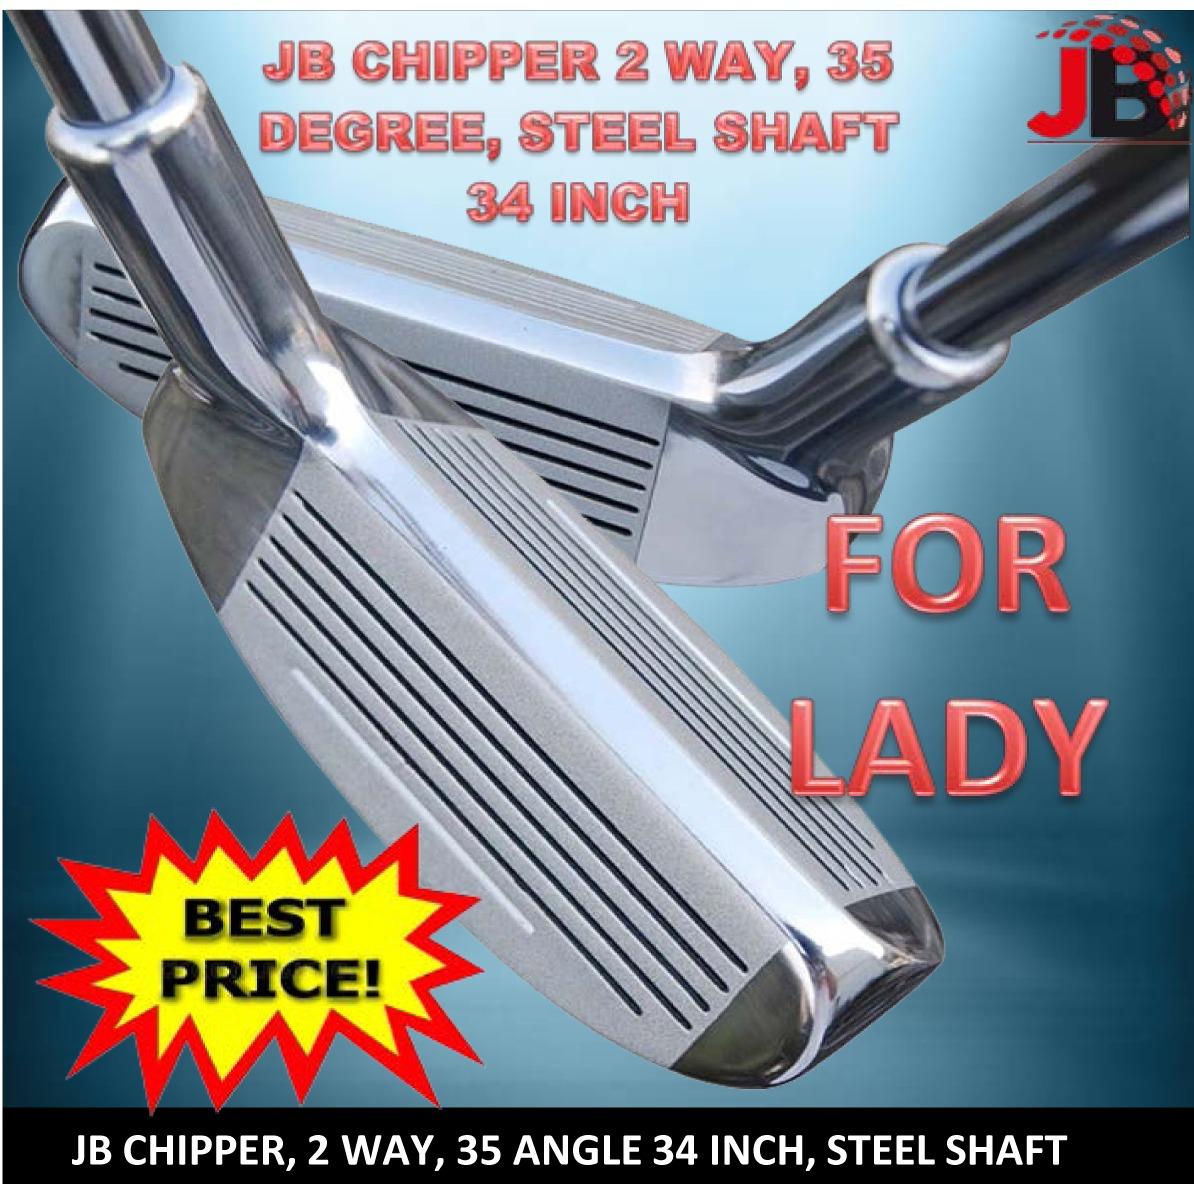 JB Chipper Two Ways (Left-Right) Angle 35 Degree (34 Inch) for Lady (Graphite or Steel Shaft)